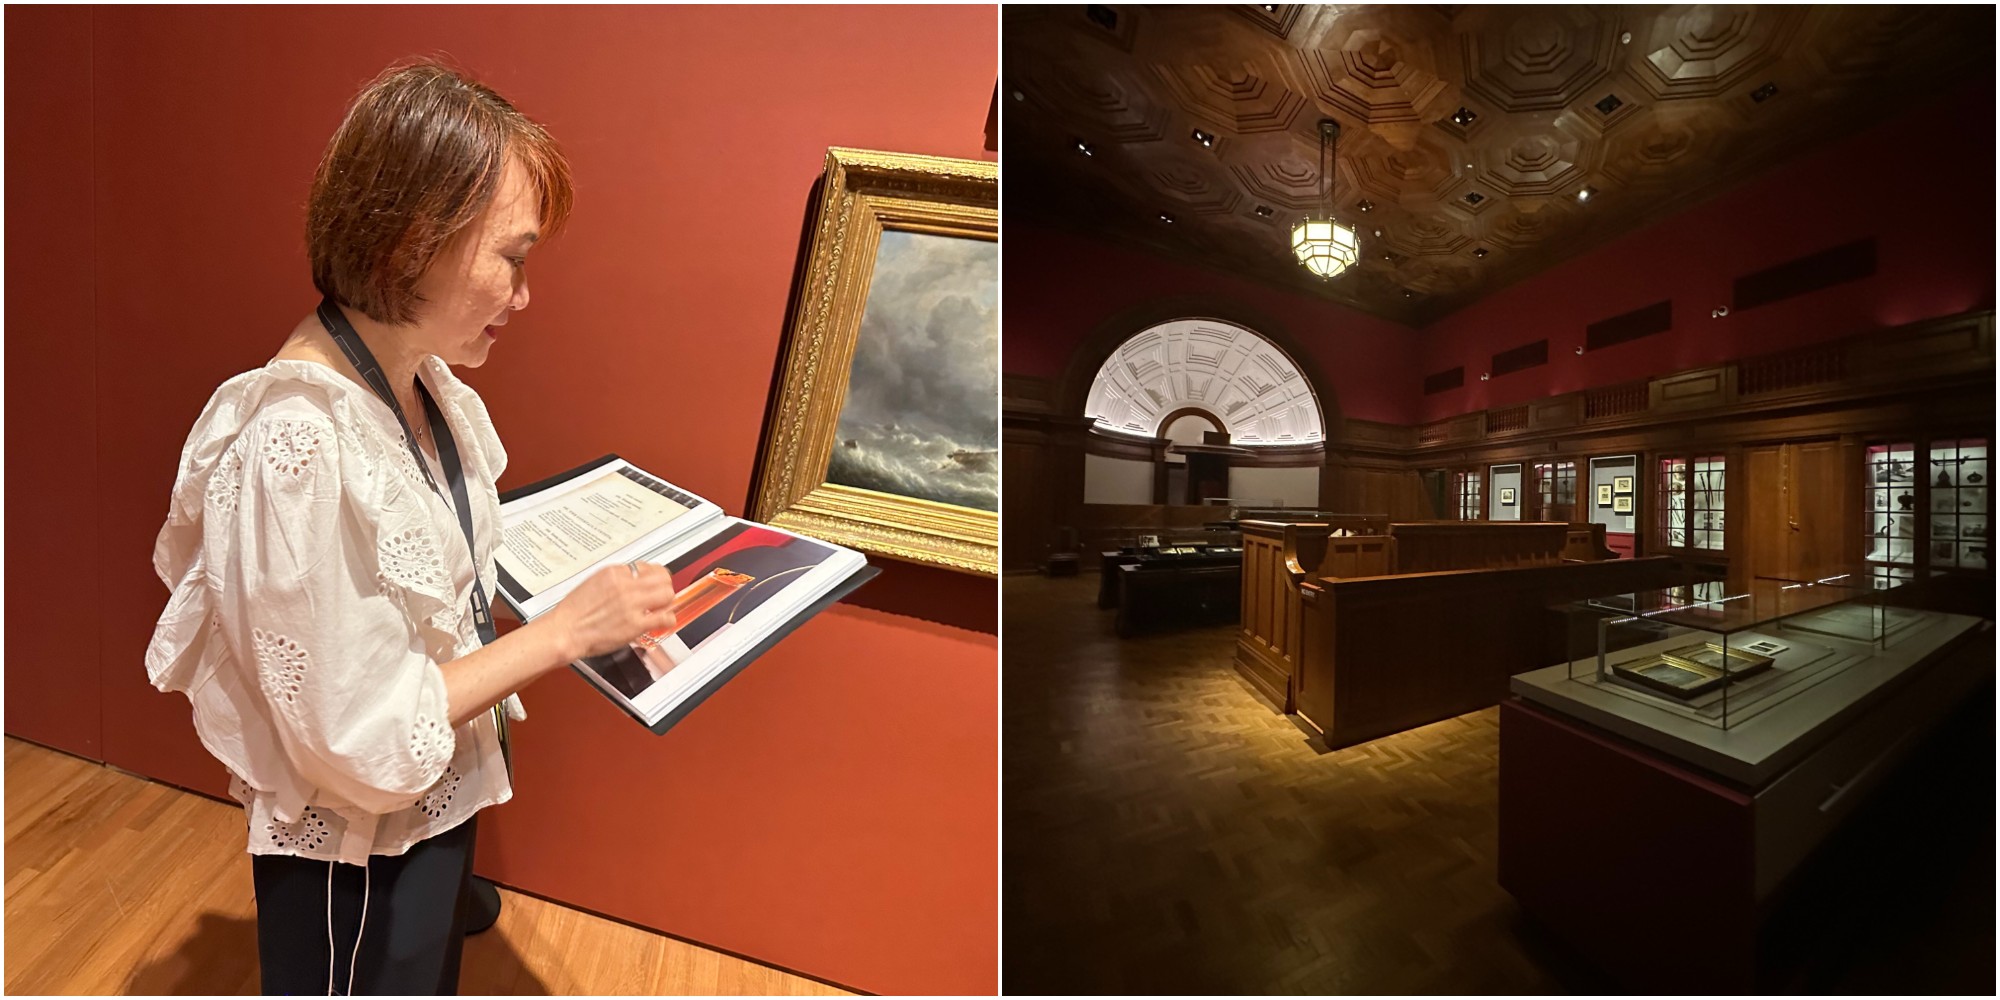 Left image: Mid shot of tour guide | Right image: Wide shot of gallery interior